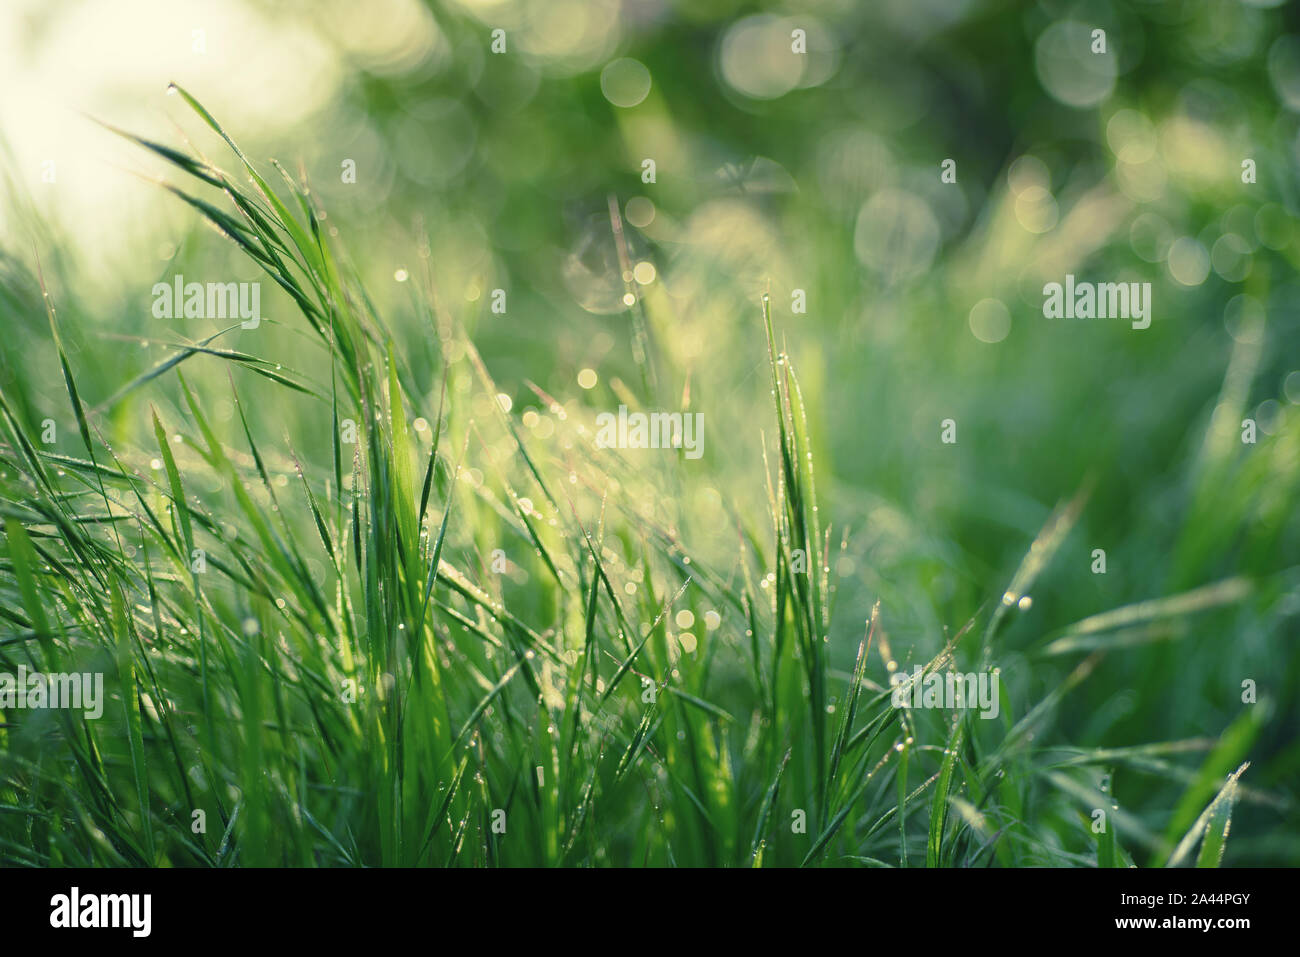 Natural abstract soft green defocused vintage background with grass and light spots. Spring easter backdrop with copy space Stock Photo